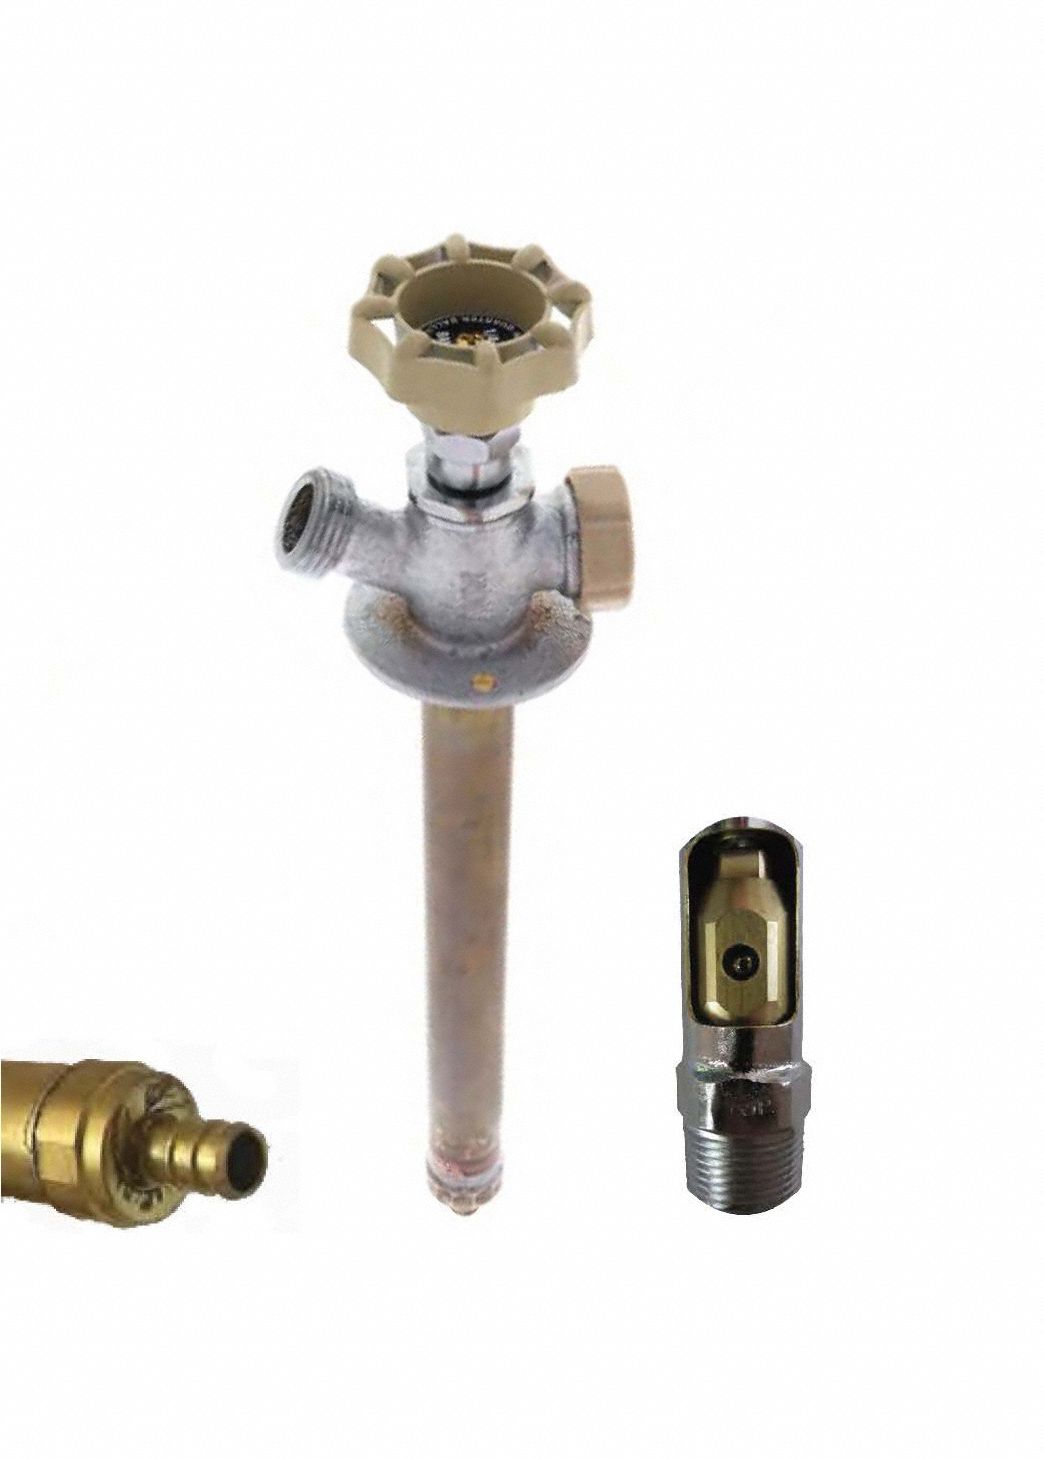 Ball Valve Frost Proof Sillcock: Quarter Turn Handwheel, PEX, ABS, 1/2 in Inlet Size